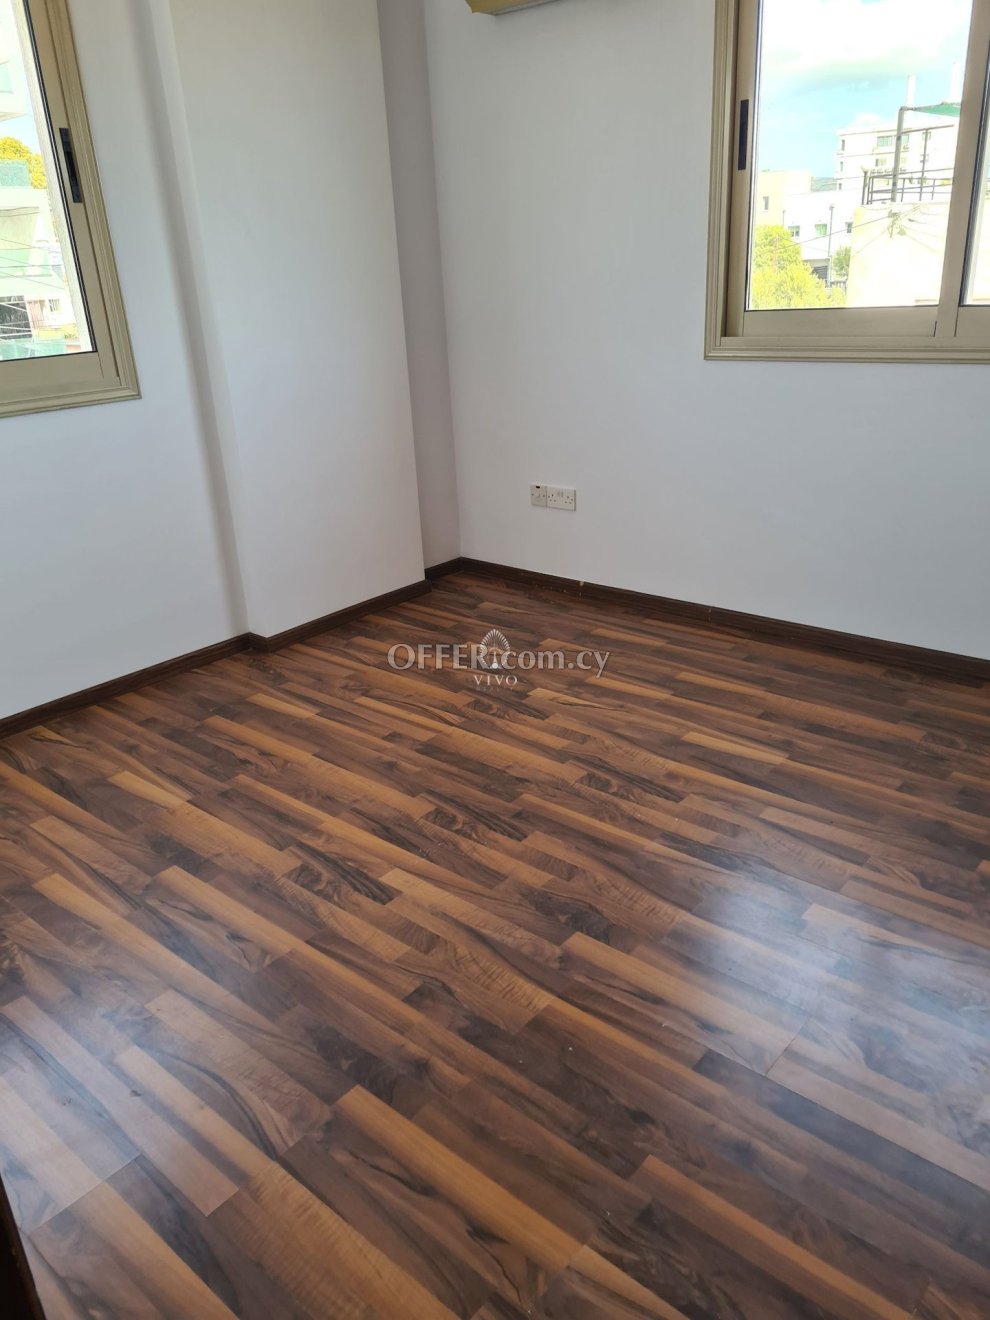 SPACIOUS 2 BEDROOM APARTMENT IN THE CITY CENTER - 5